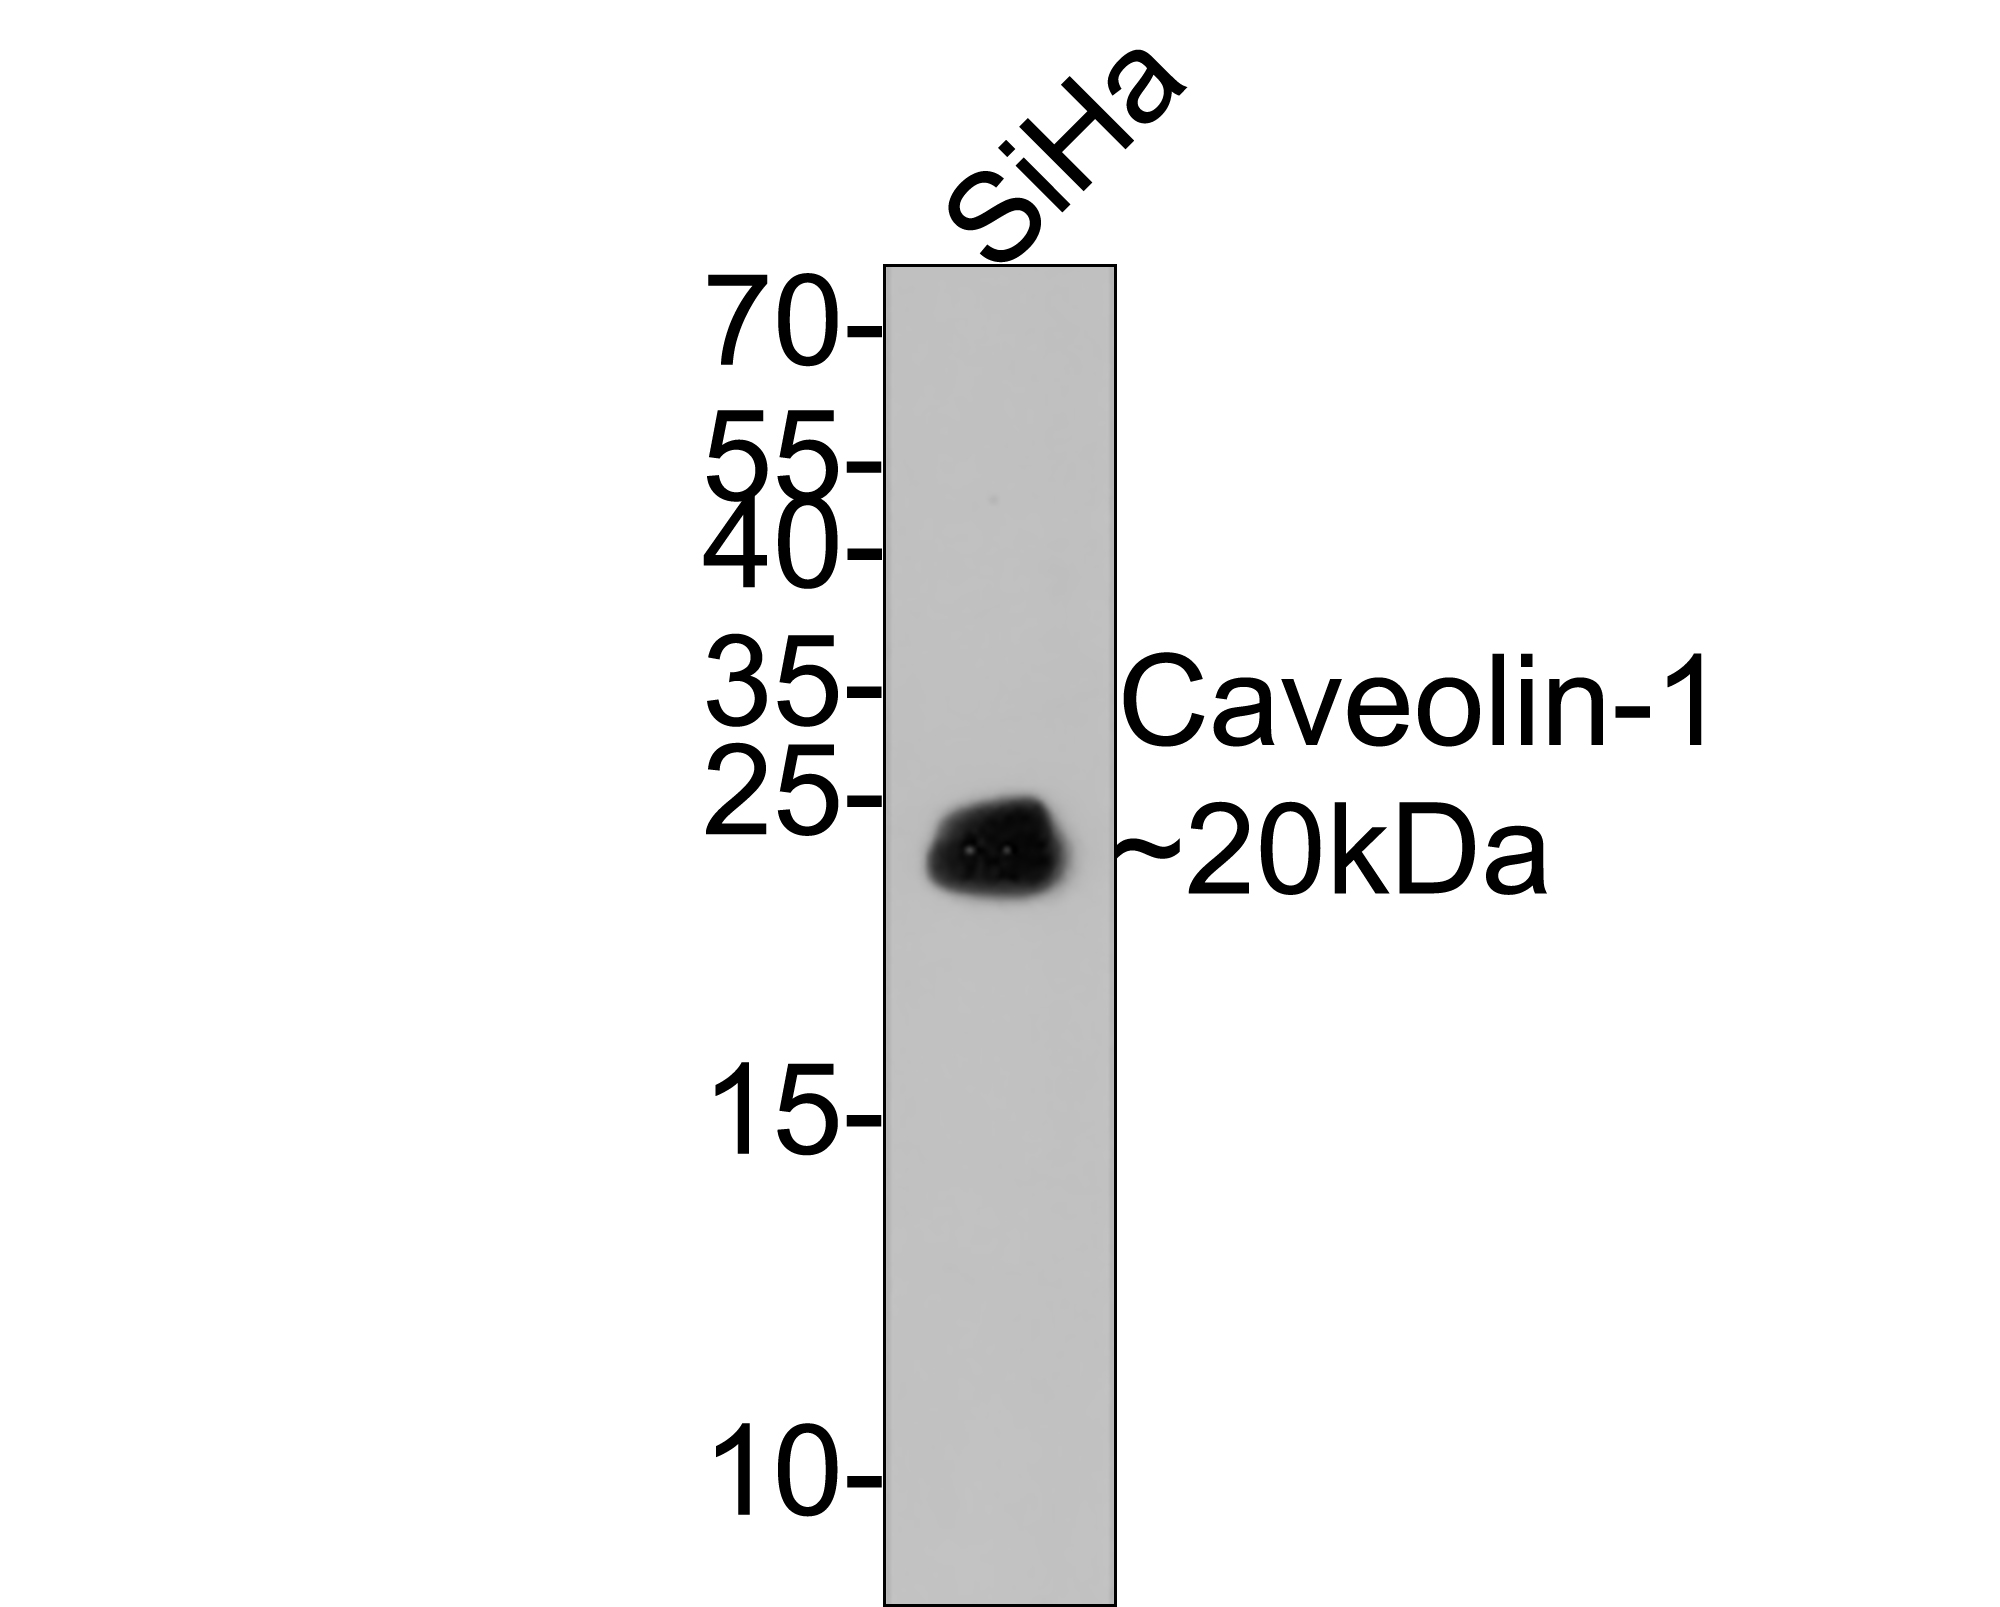 Western blot analysis of Caveolin-1 on SiHa cell lysates with Mouse anti-Caveolin-1 antibody (HA601005) at 1/500 dilution.<br />
<br />
Lysates/proteins at 10 µg/Lane.<br />
<br />
Predicted band size: 20 kDa<br />
Observed band size: 20 kDa<br />
<br />
Exposure time: 1 minute;<br />
<br />
15% SDS-PAGE gel.<br />
<br />
Proteins were transferred to a PVDF membrane and blocked with 5% NFDM/TBST for 1 hour at room temperature. The primary antibody (HA601005) at 1/500 dilution was used in 5% NFDM/TBST at room temperature for 2 hours. Goat Anti-Mouse IgG - HRP Secondary Antibody (HA1006) at 1:100,000 dilution was used for 1 hour at room temperature.